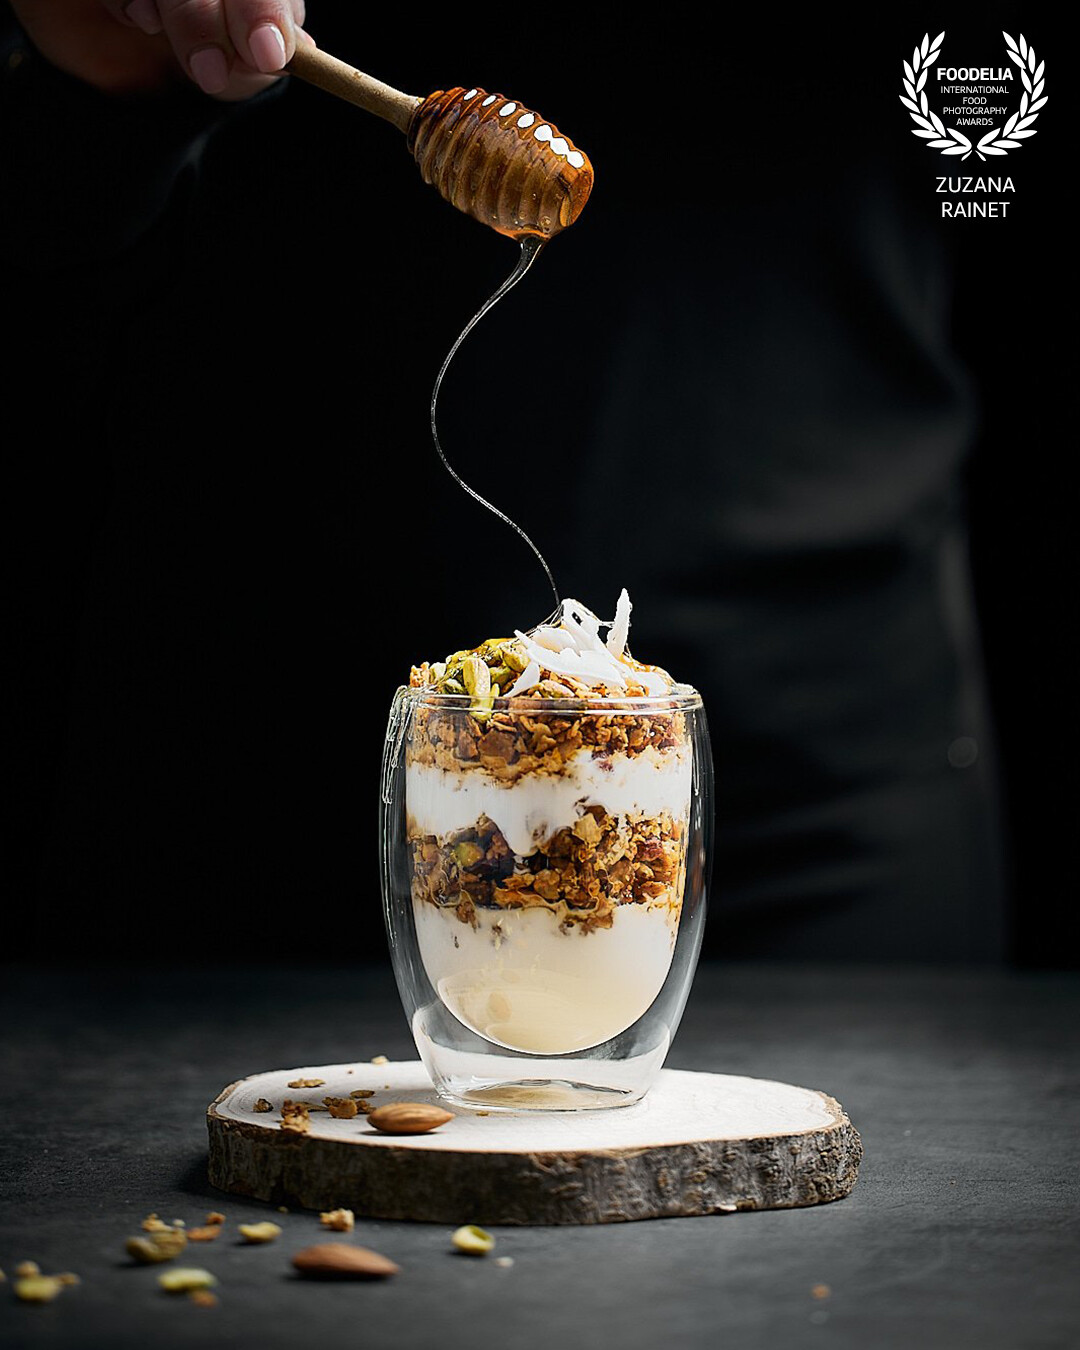 This image was shot for a client producing granola. I focused on capturing the frozen movement of honey to enhance the taste of morning treat. Shot with the studio flash light.